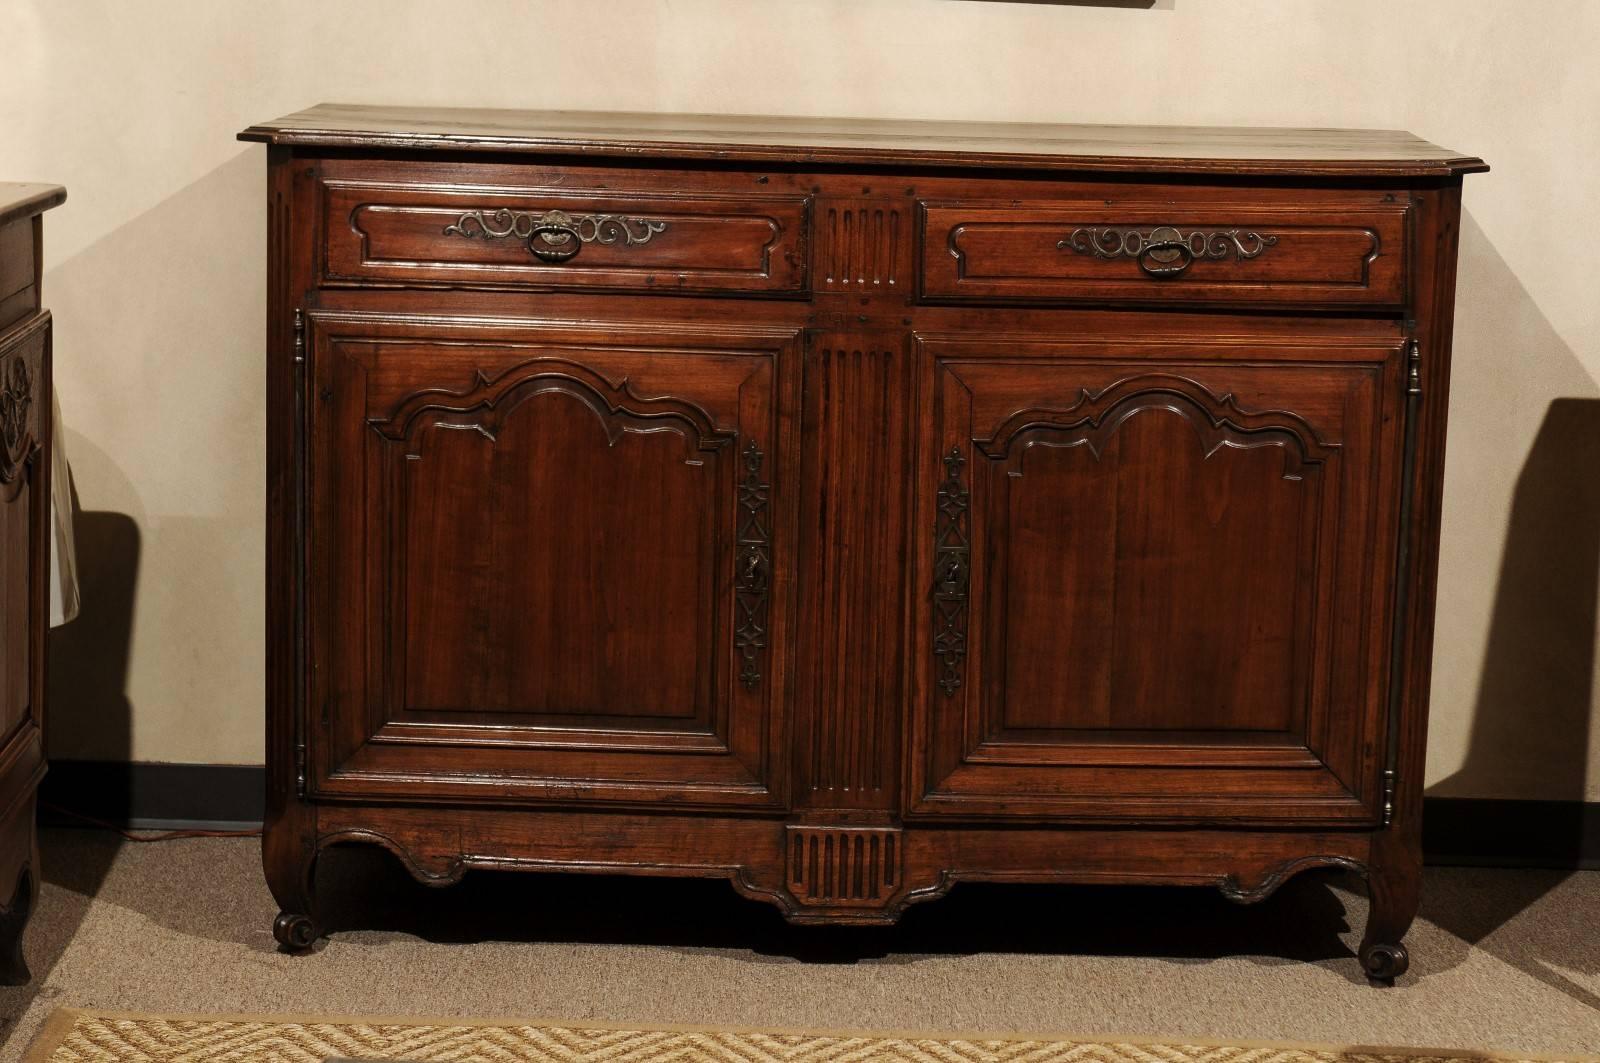 Transitional Louis XV-VI Style cherry buffet, circa 1860

Years of waxing and hand polishing have added a rich color and patina to this substantial buffet. It is large enough to provide a good amount of storage and ample surface for serving. The